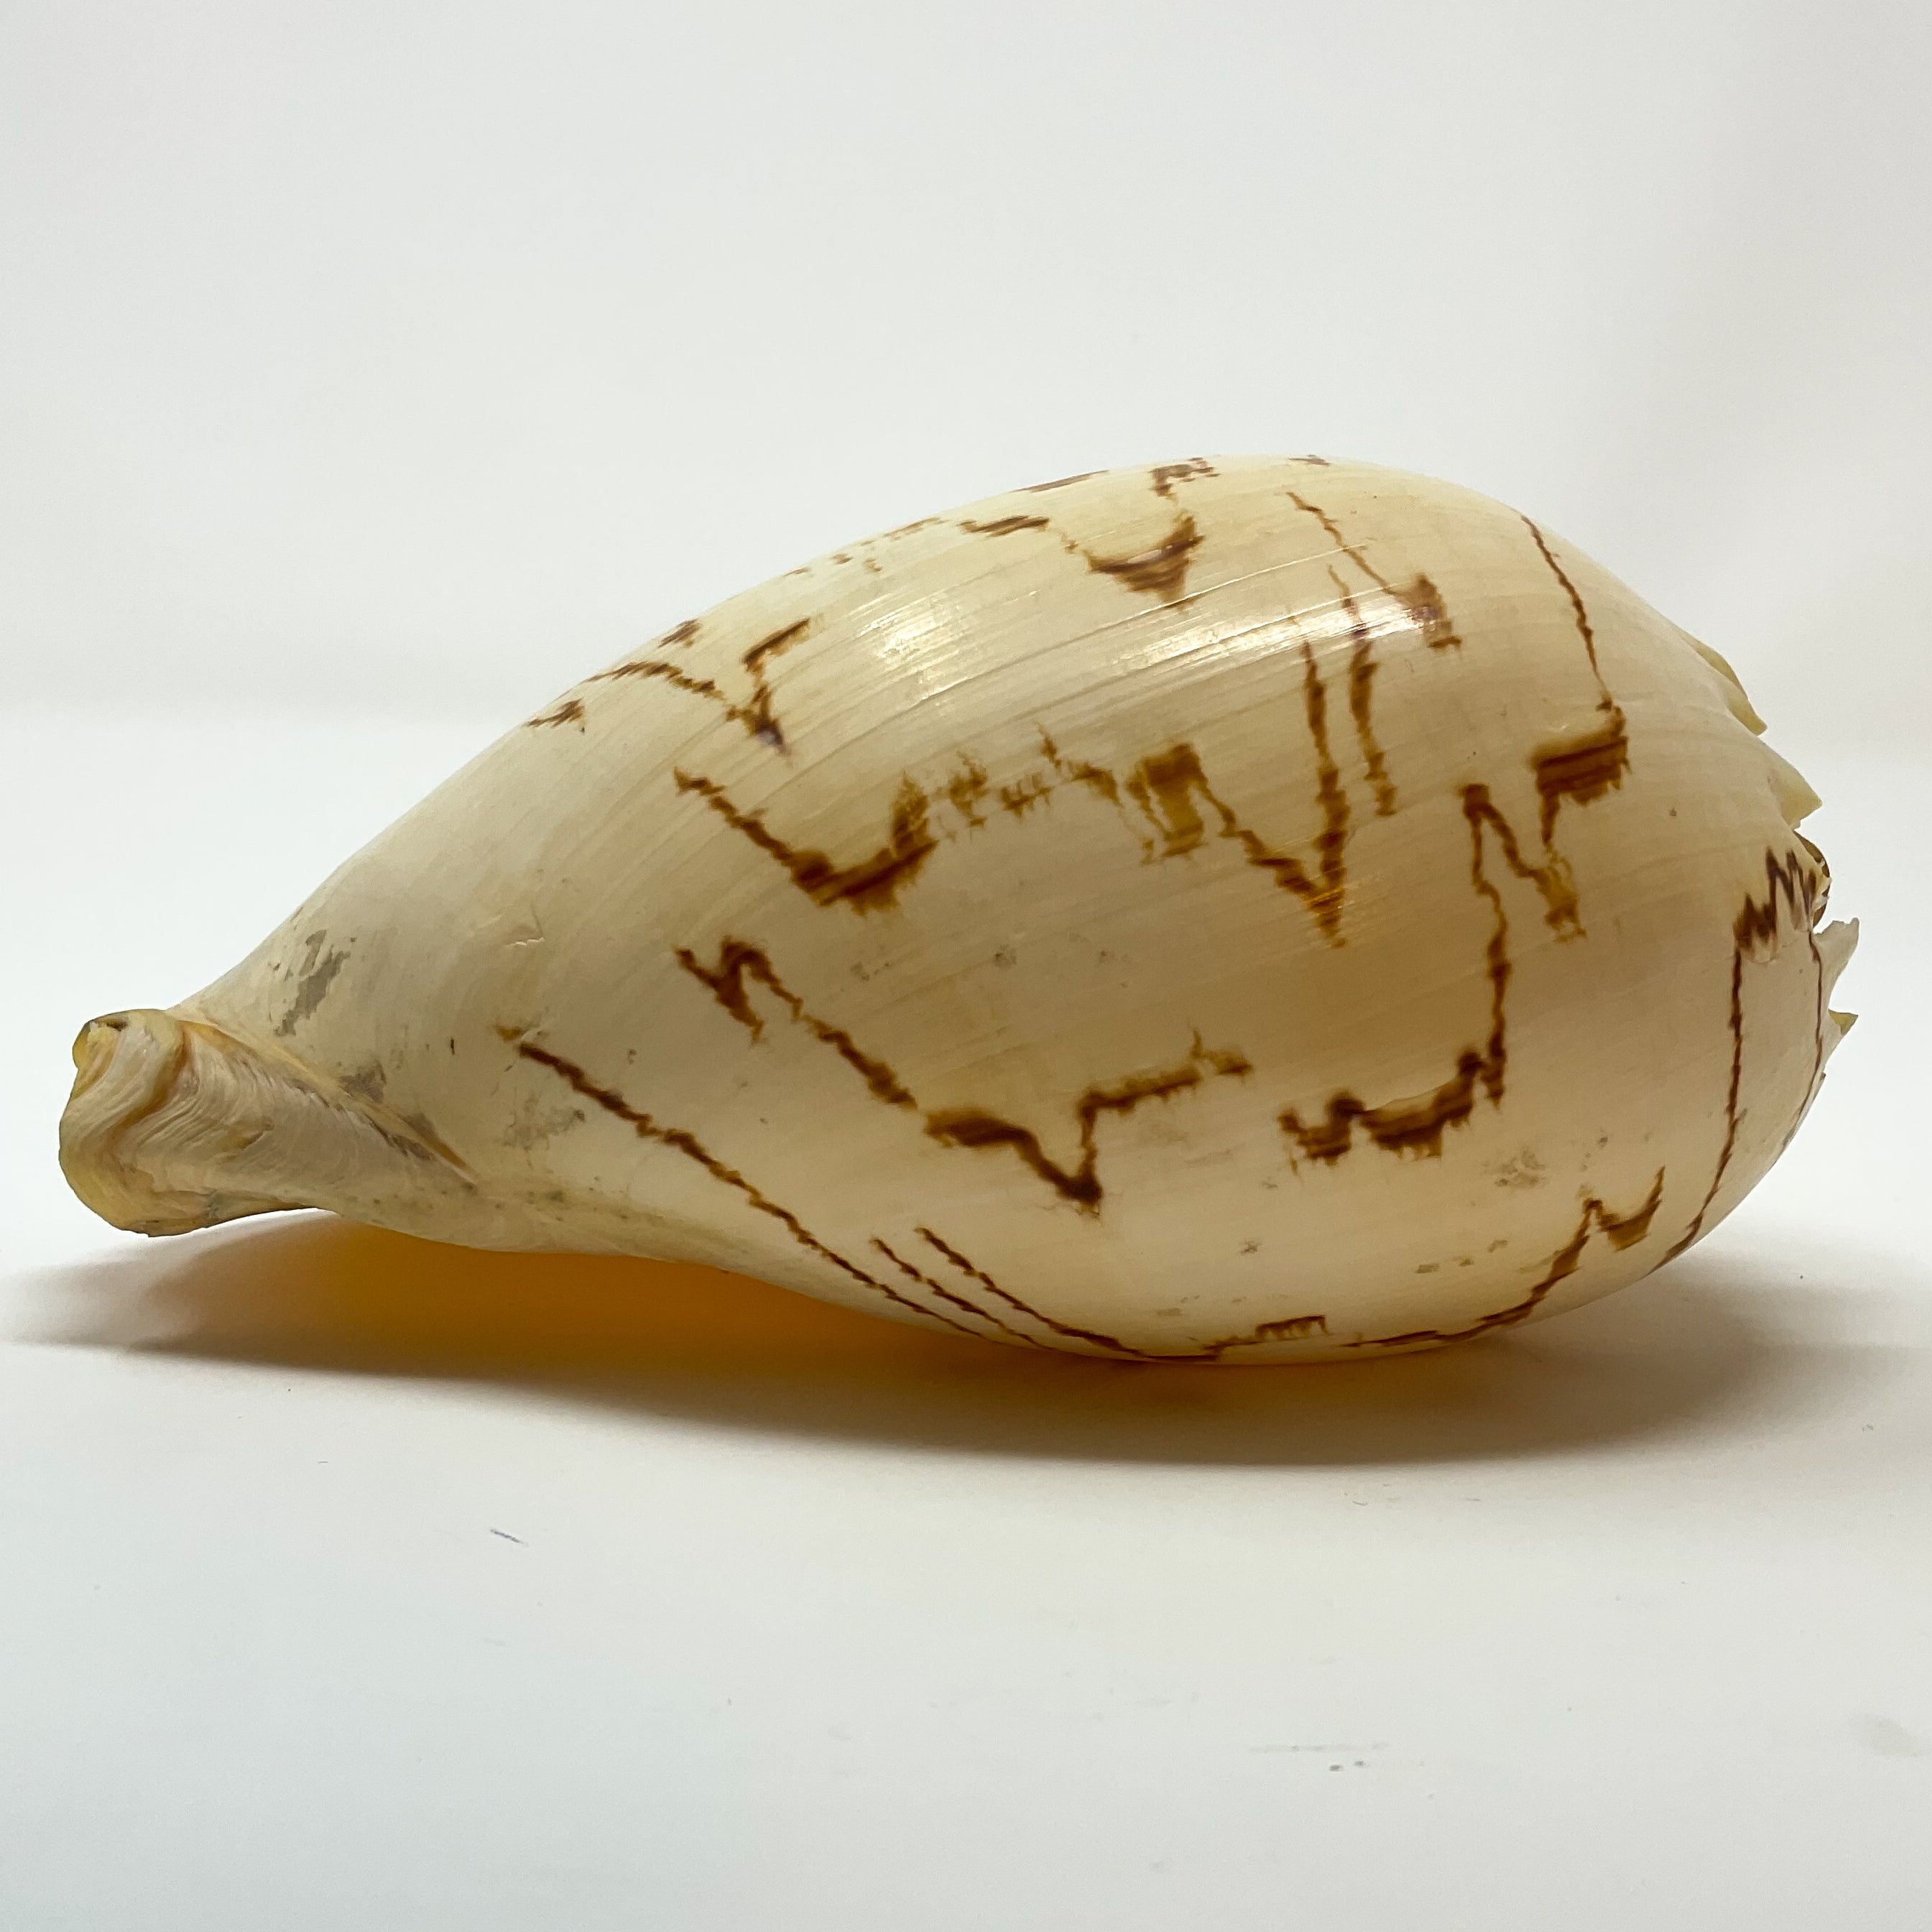 Crowned Baler Shell (Melo aethiopus) from the Philippines